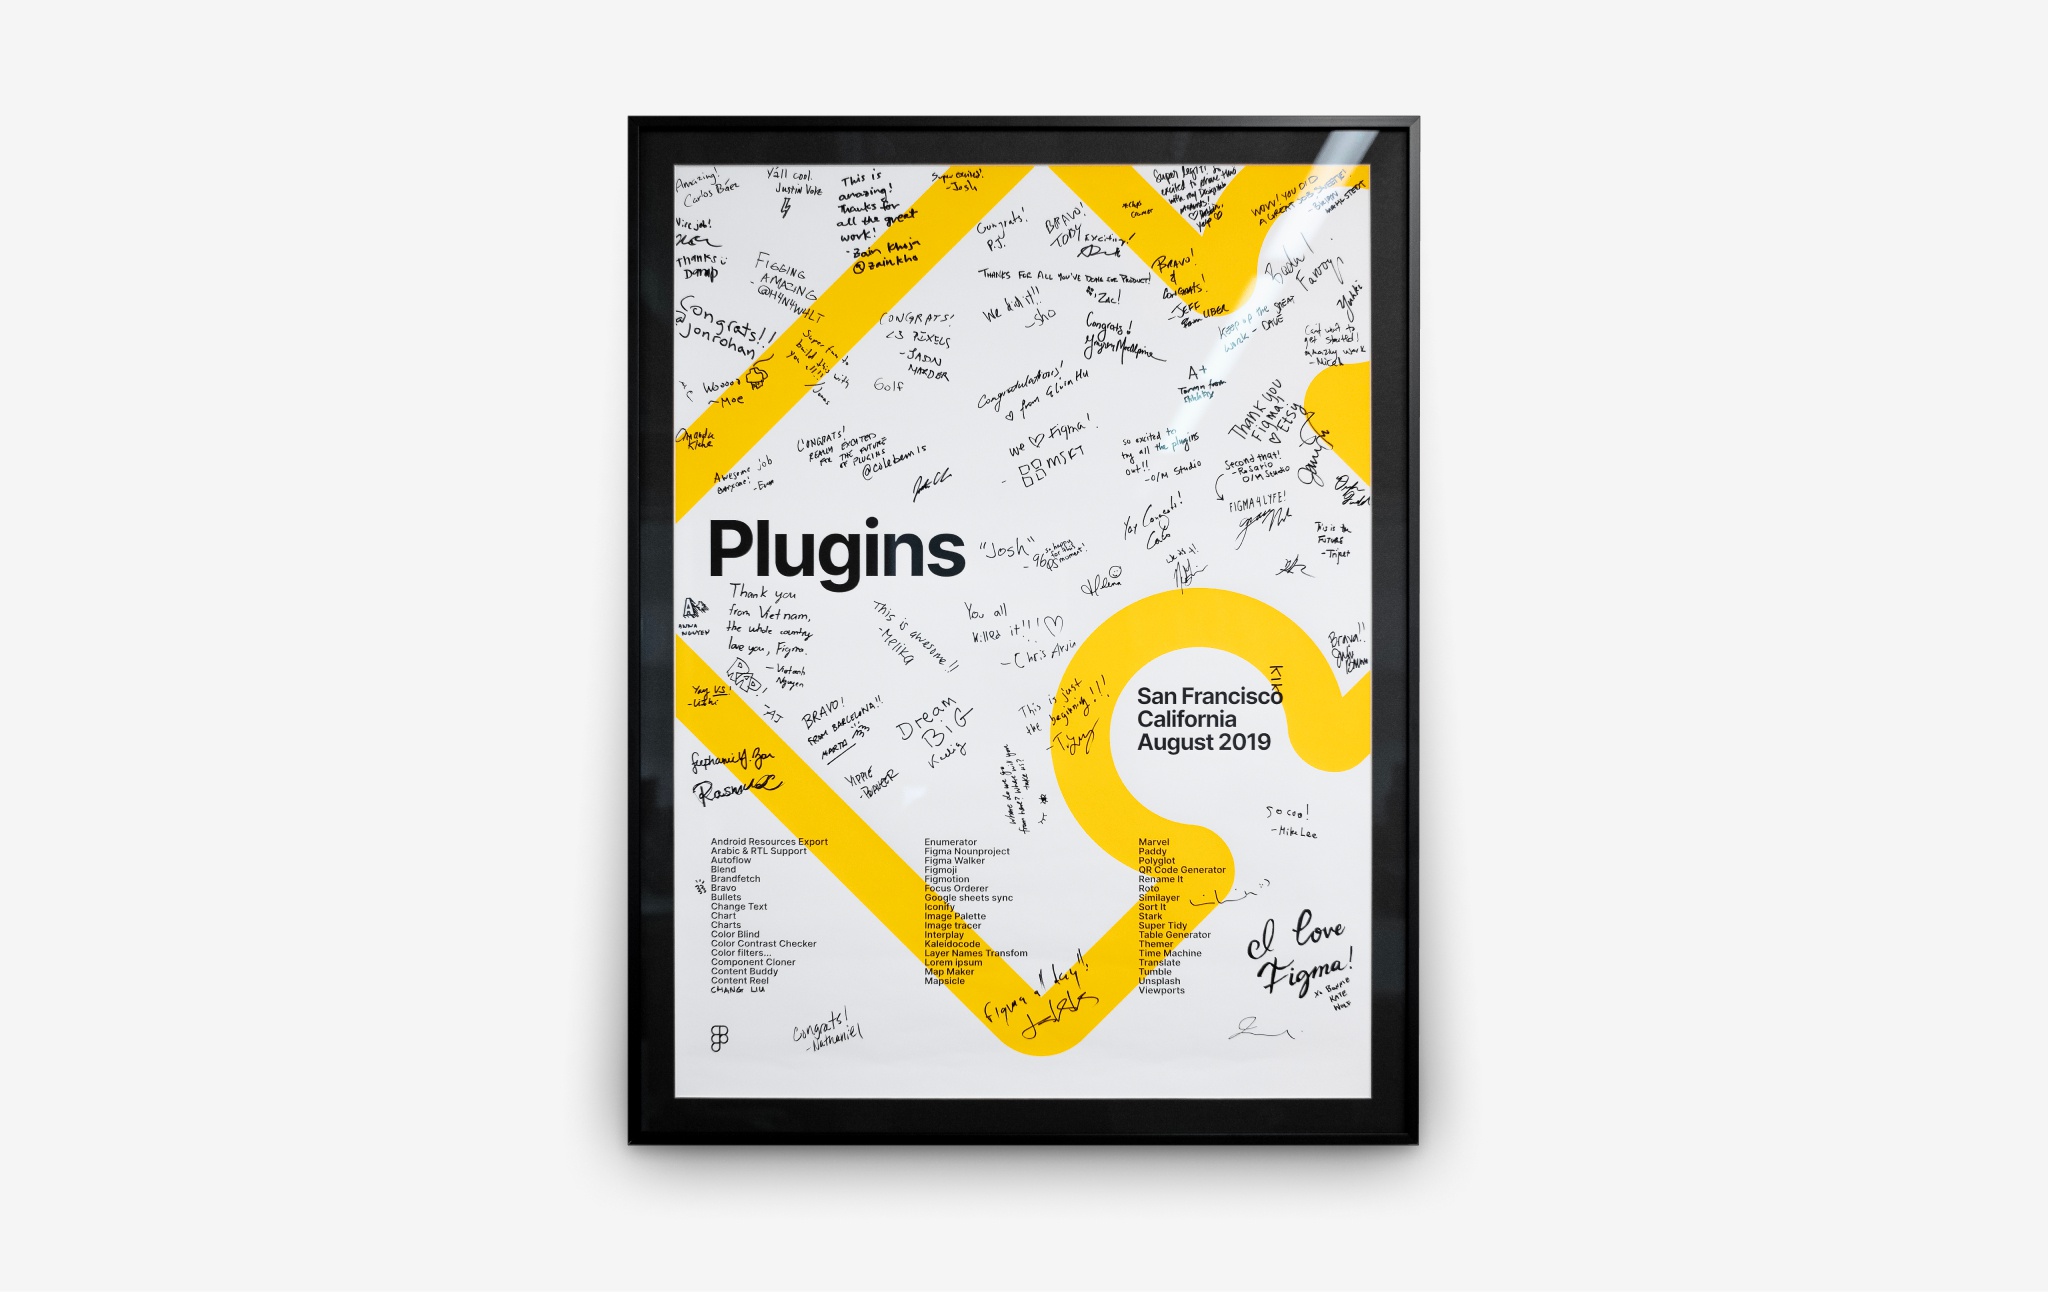 Photo of the plugins launch poster